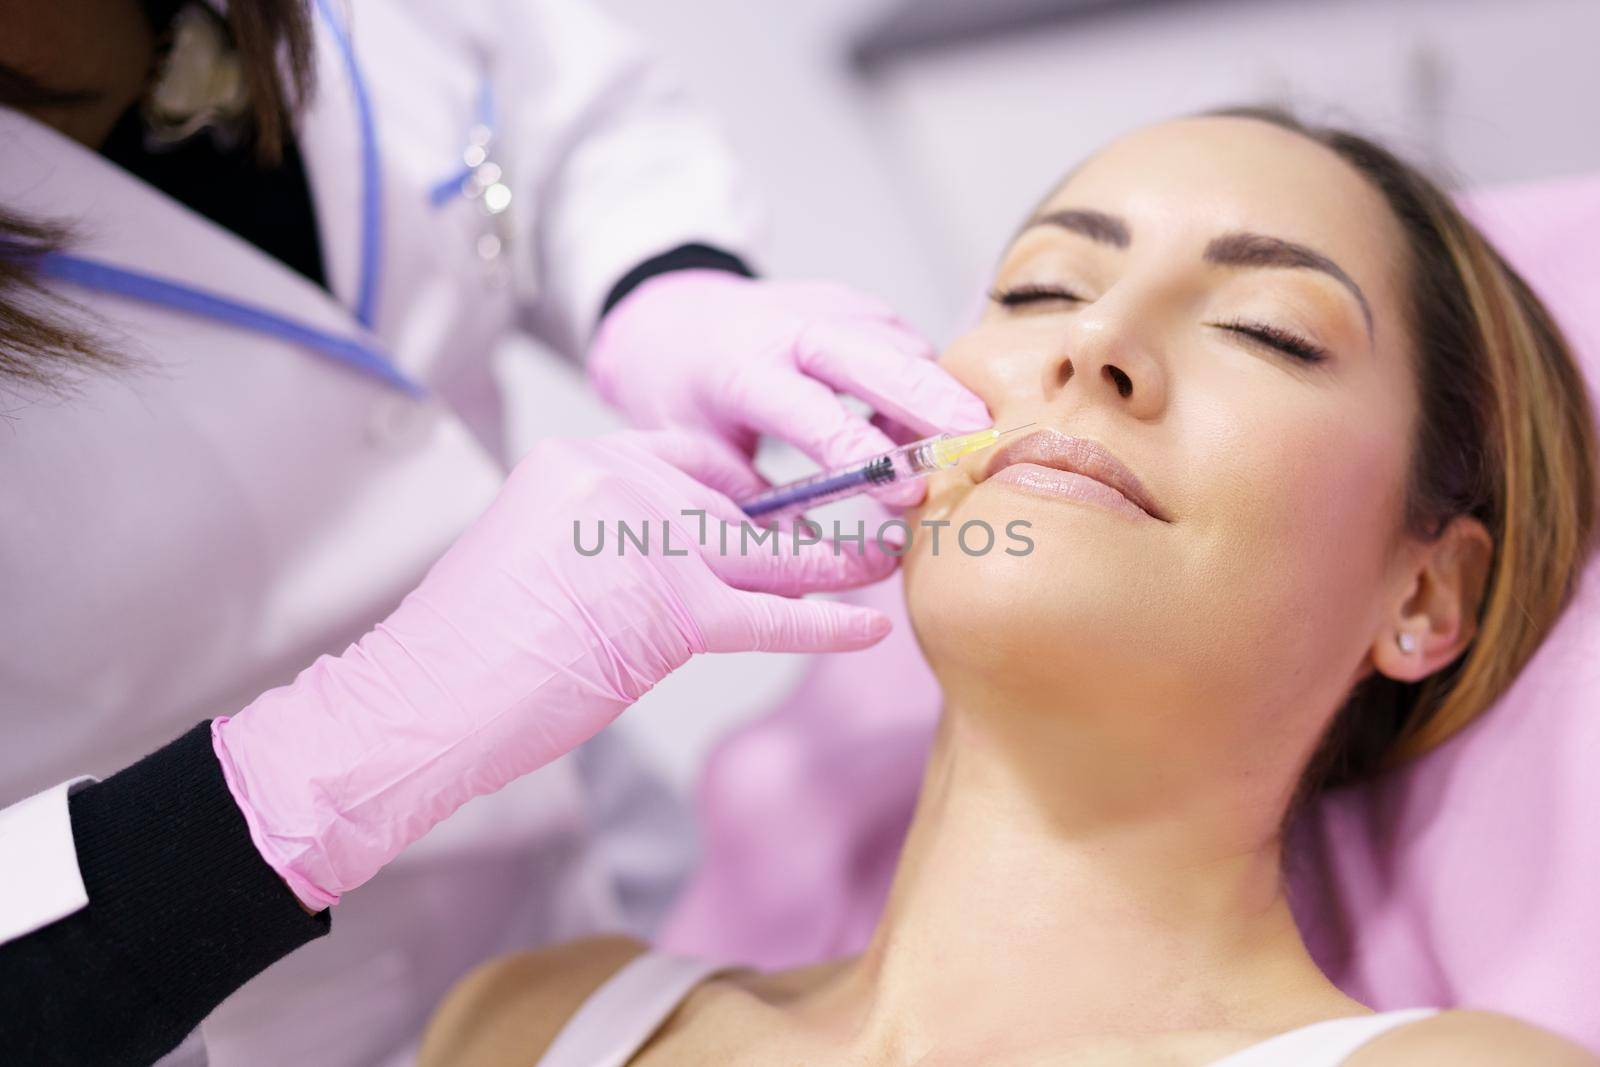 Doctor injecting hyaluronic acid in the face of a woman as a facial rejuvenation treatment. by javiindy